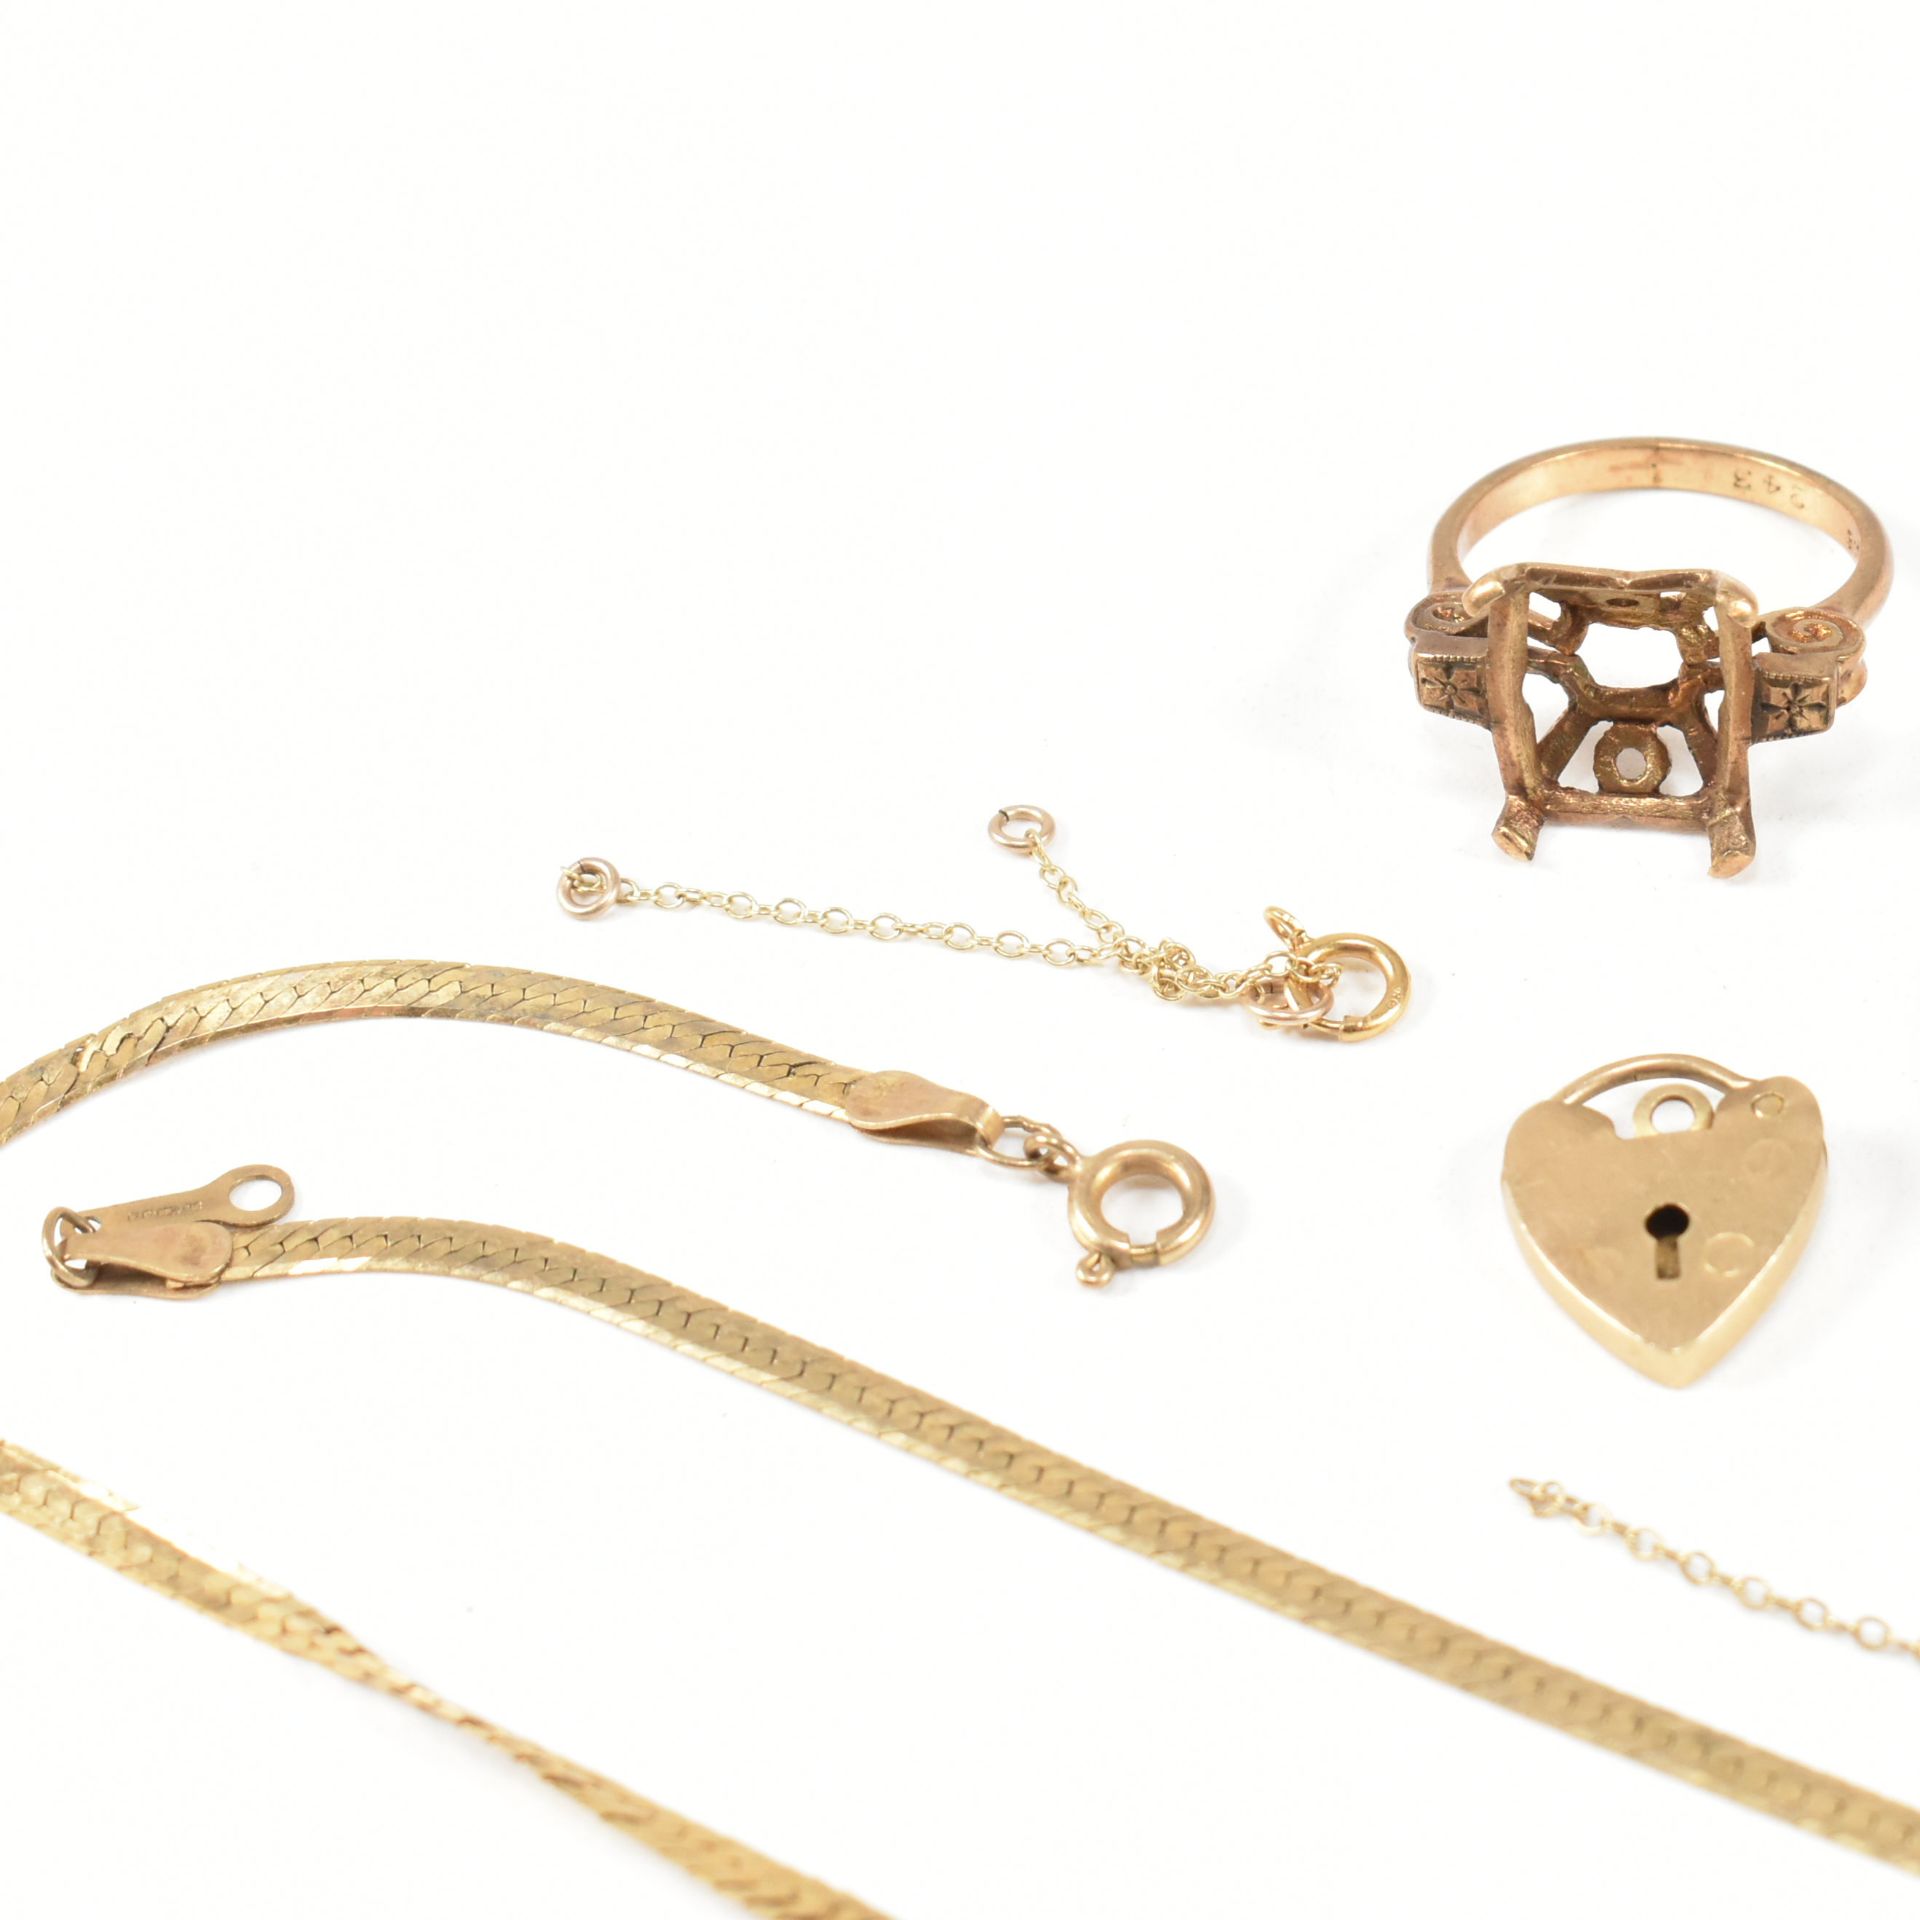 COLLECTION OF 9CT GOLD JEWELLERY COMPONENTS - Image 2 of 6